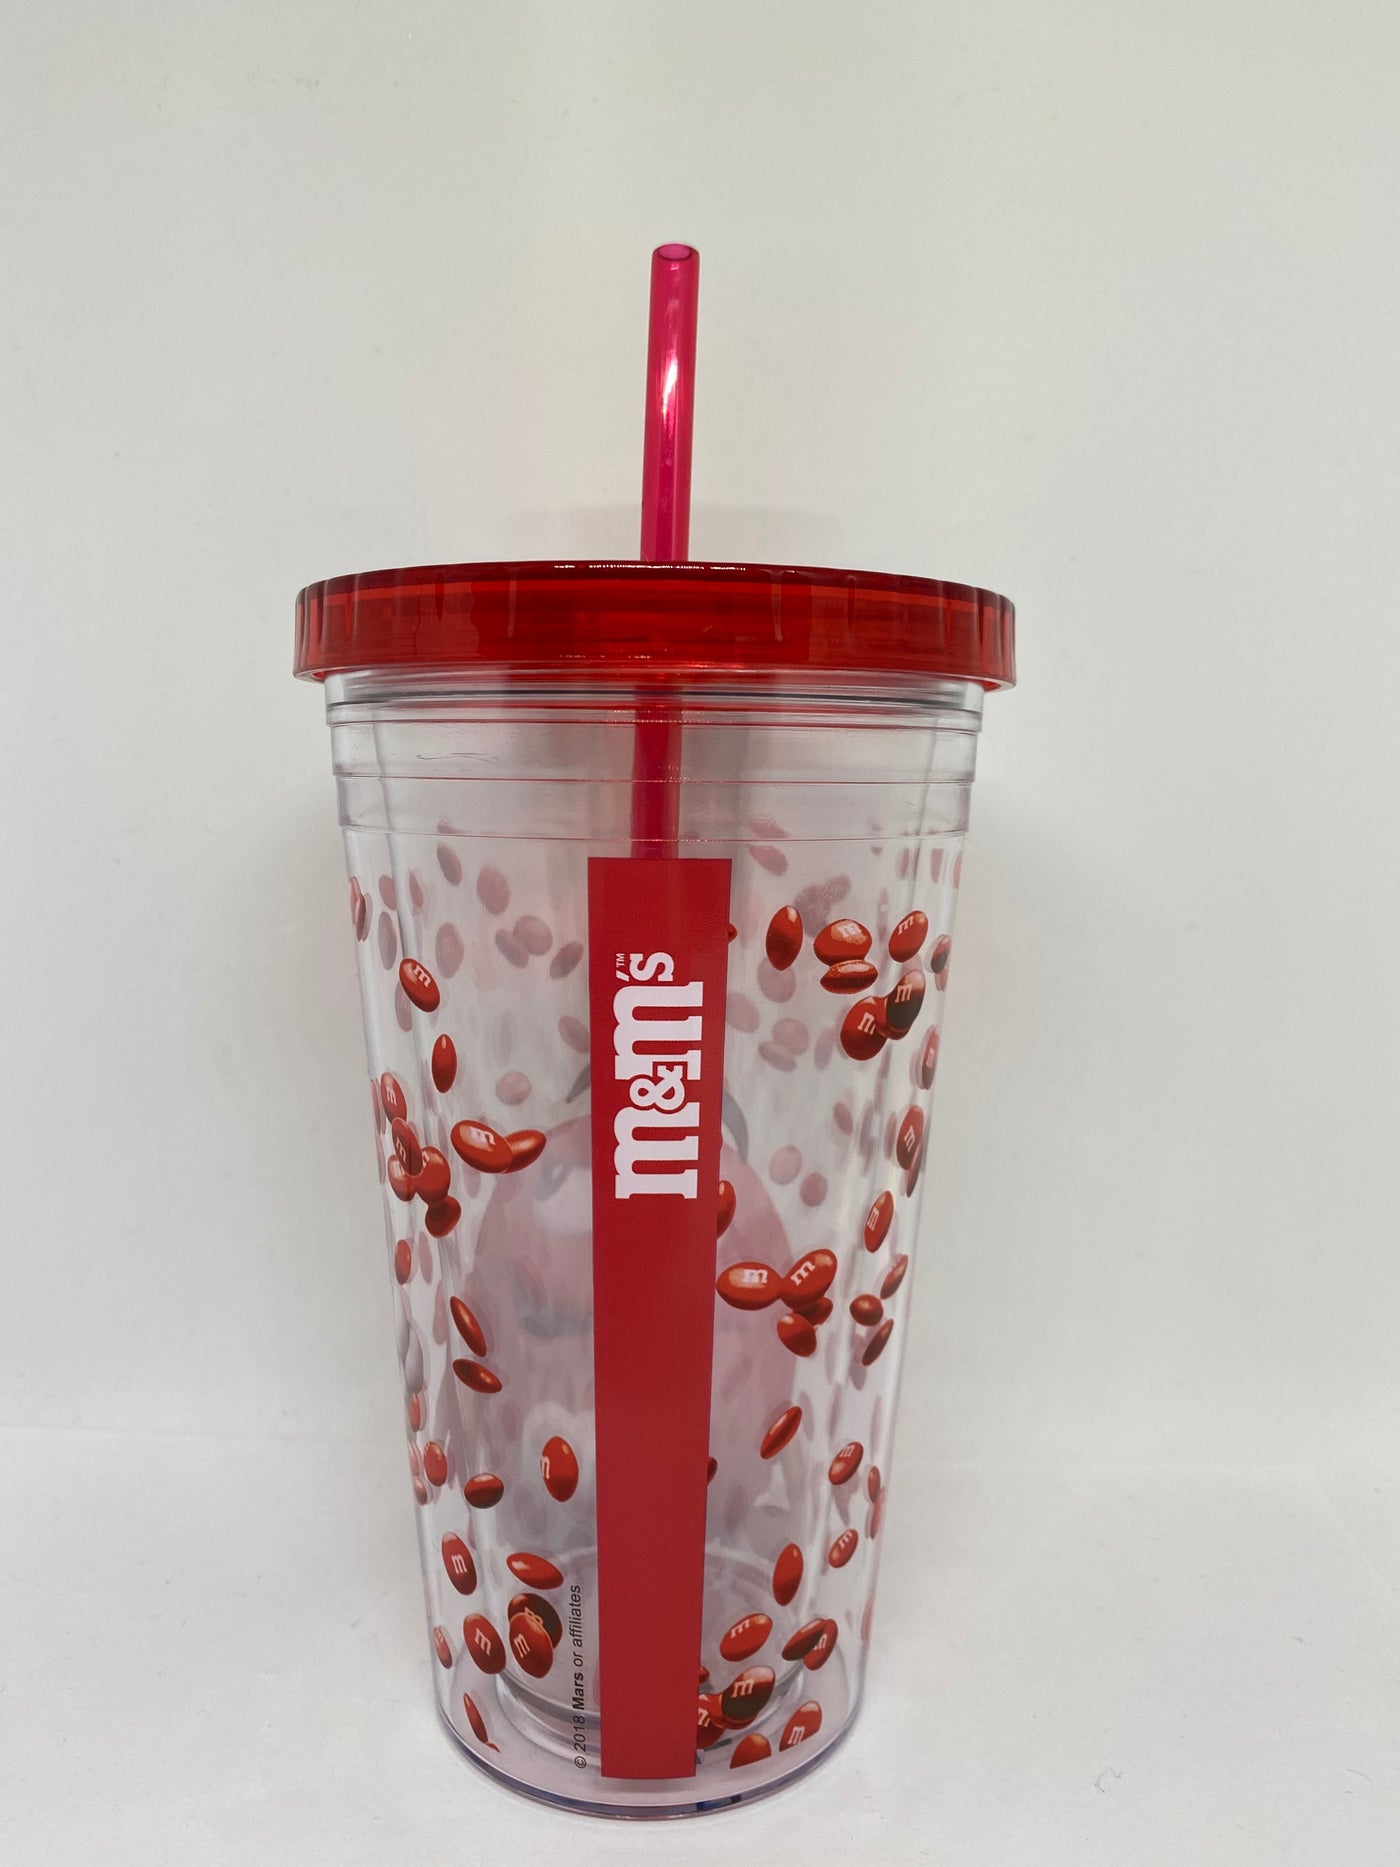 M&M's World Red Big Face Lentils Tumbler with Straw New